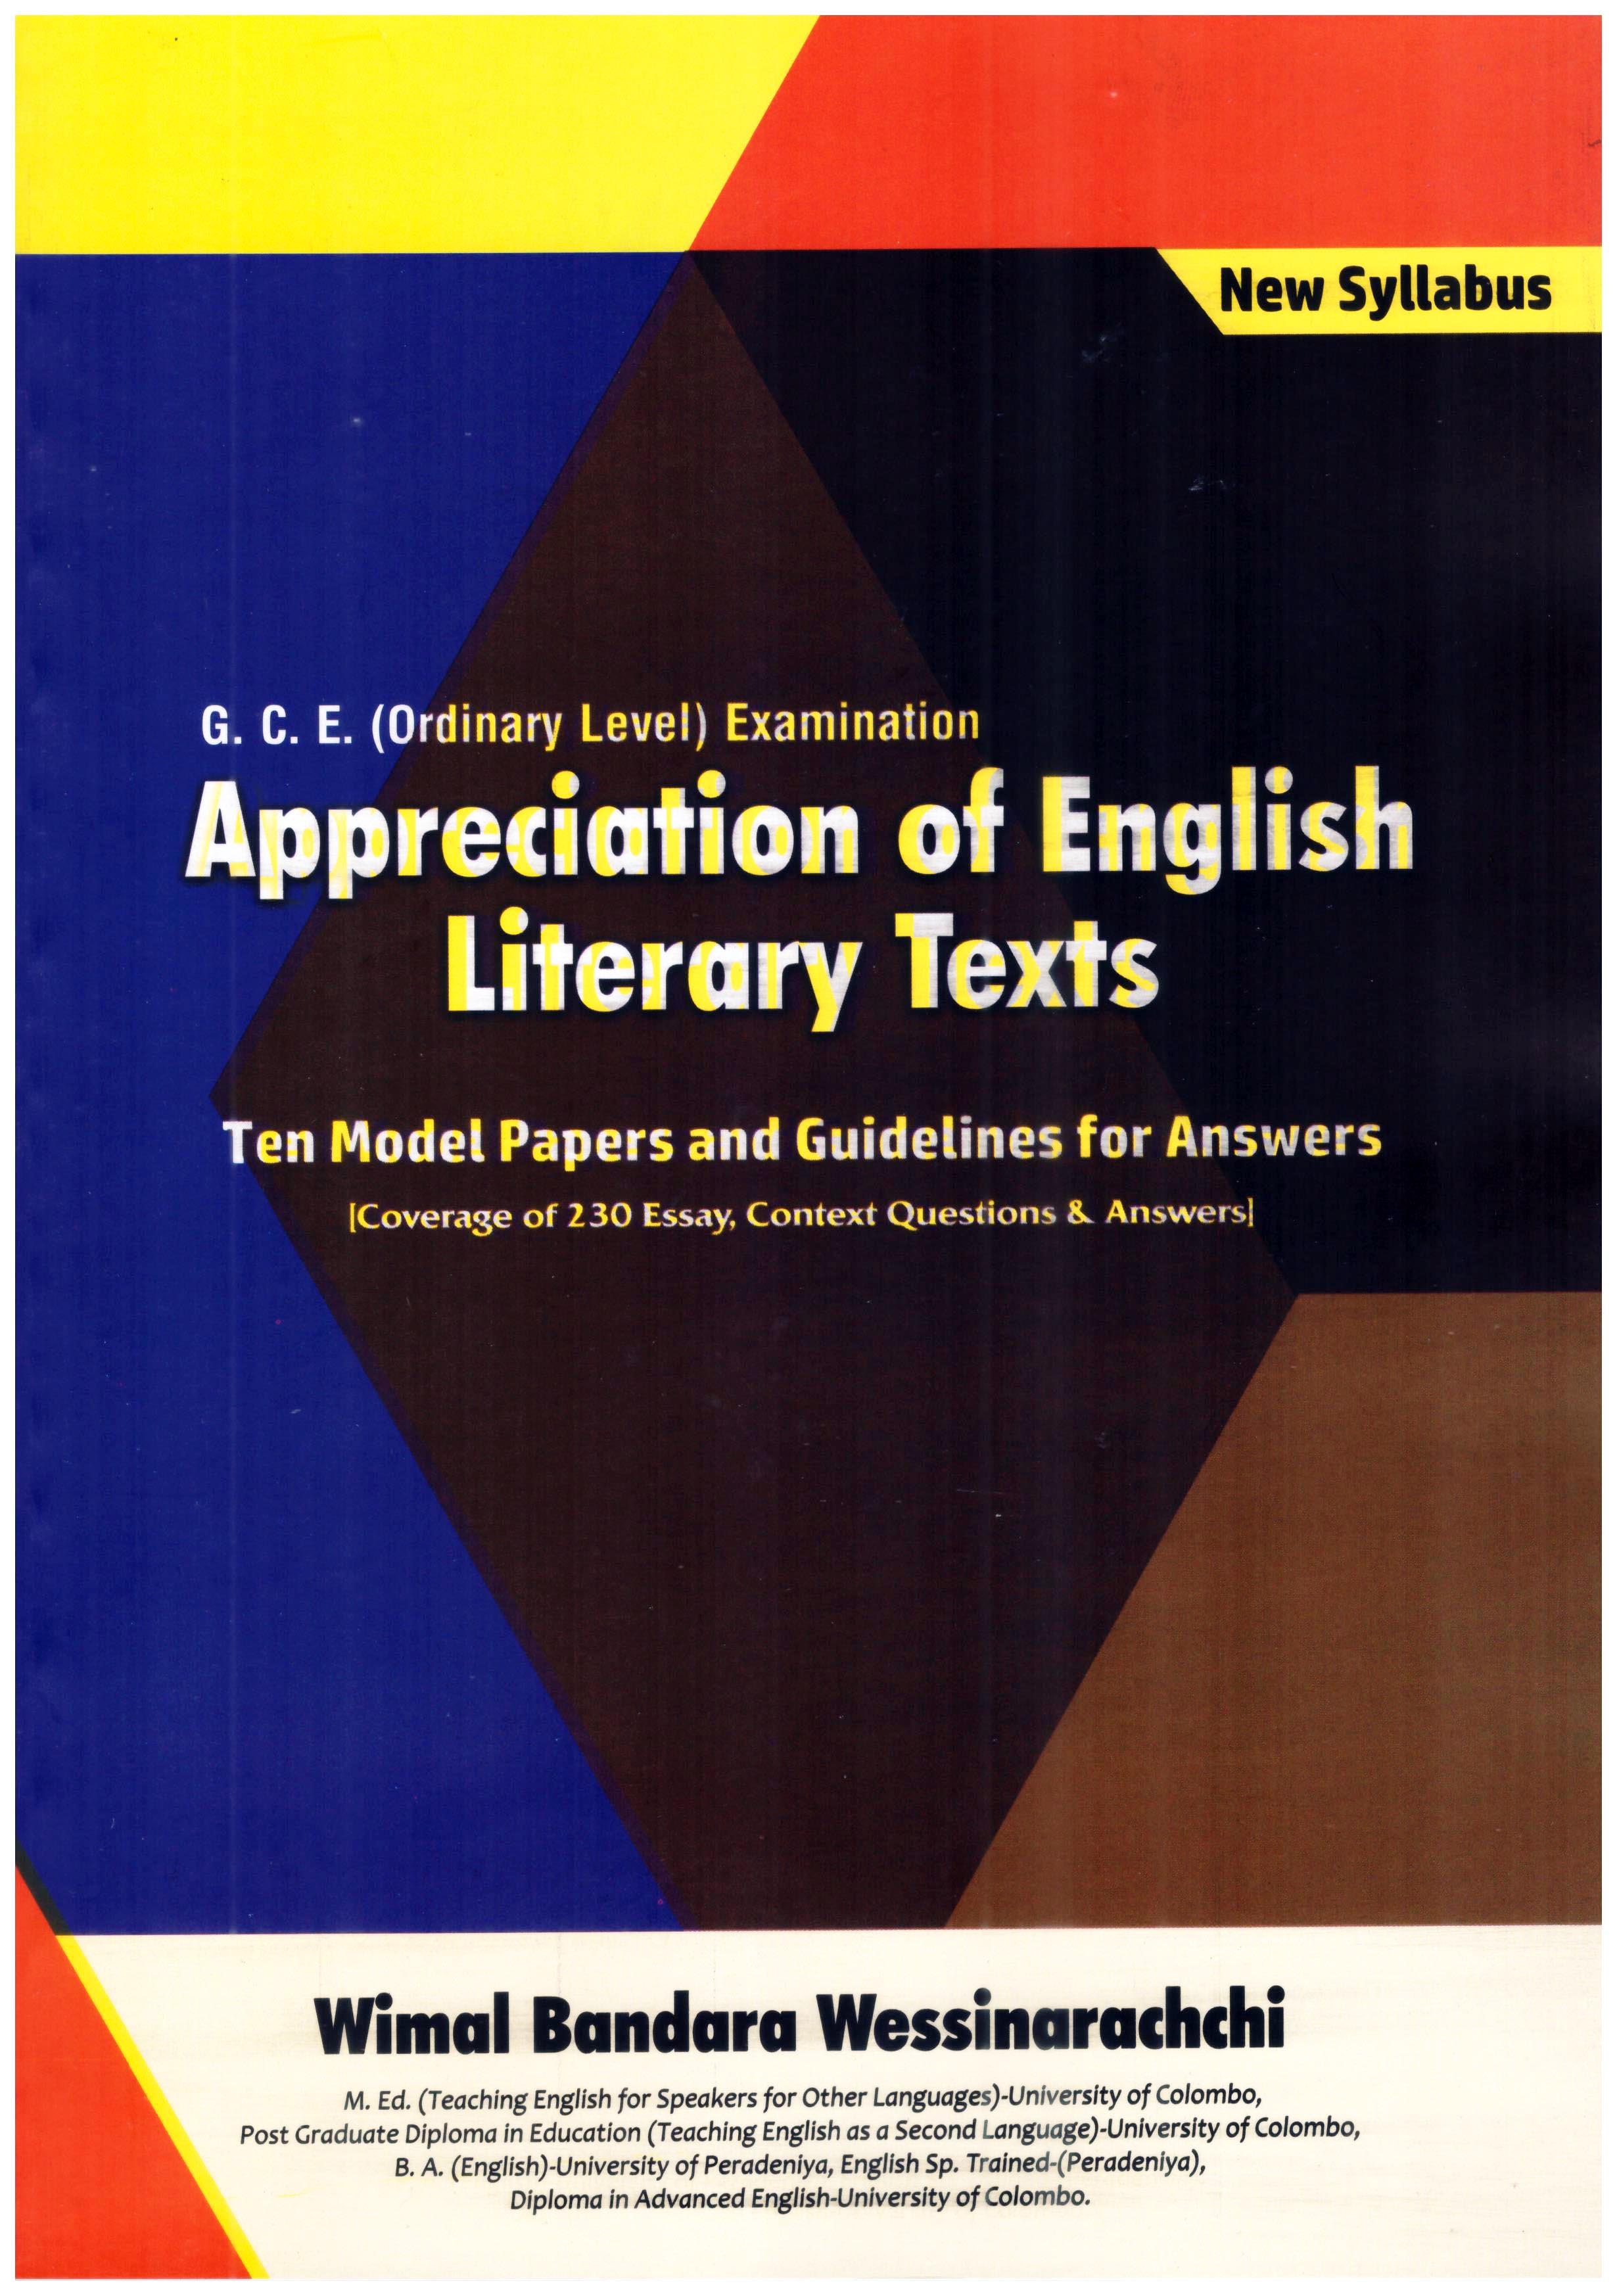 O/L Appreciation of English Literary Texts ( Ten Model Paoers and Guidelines for Answers )